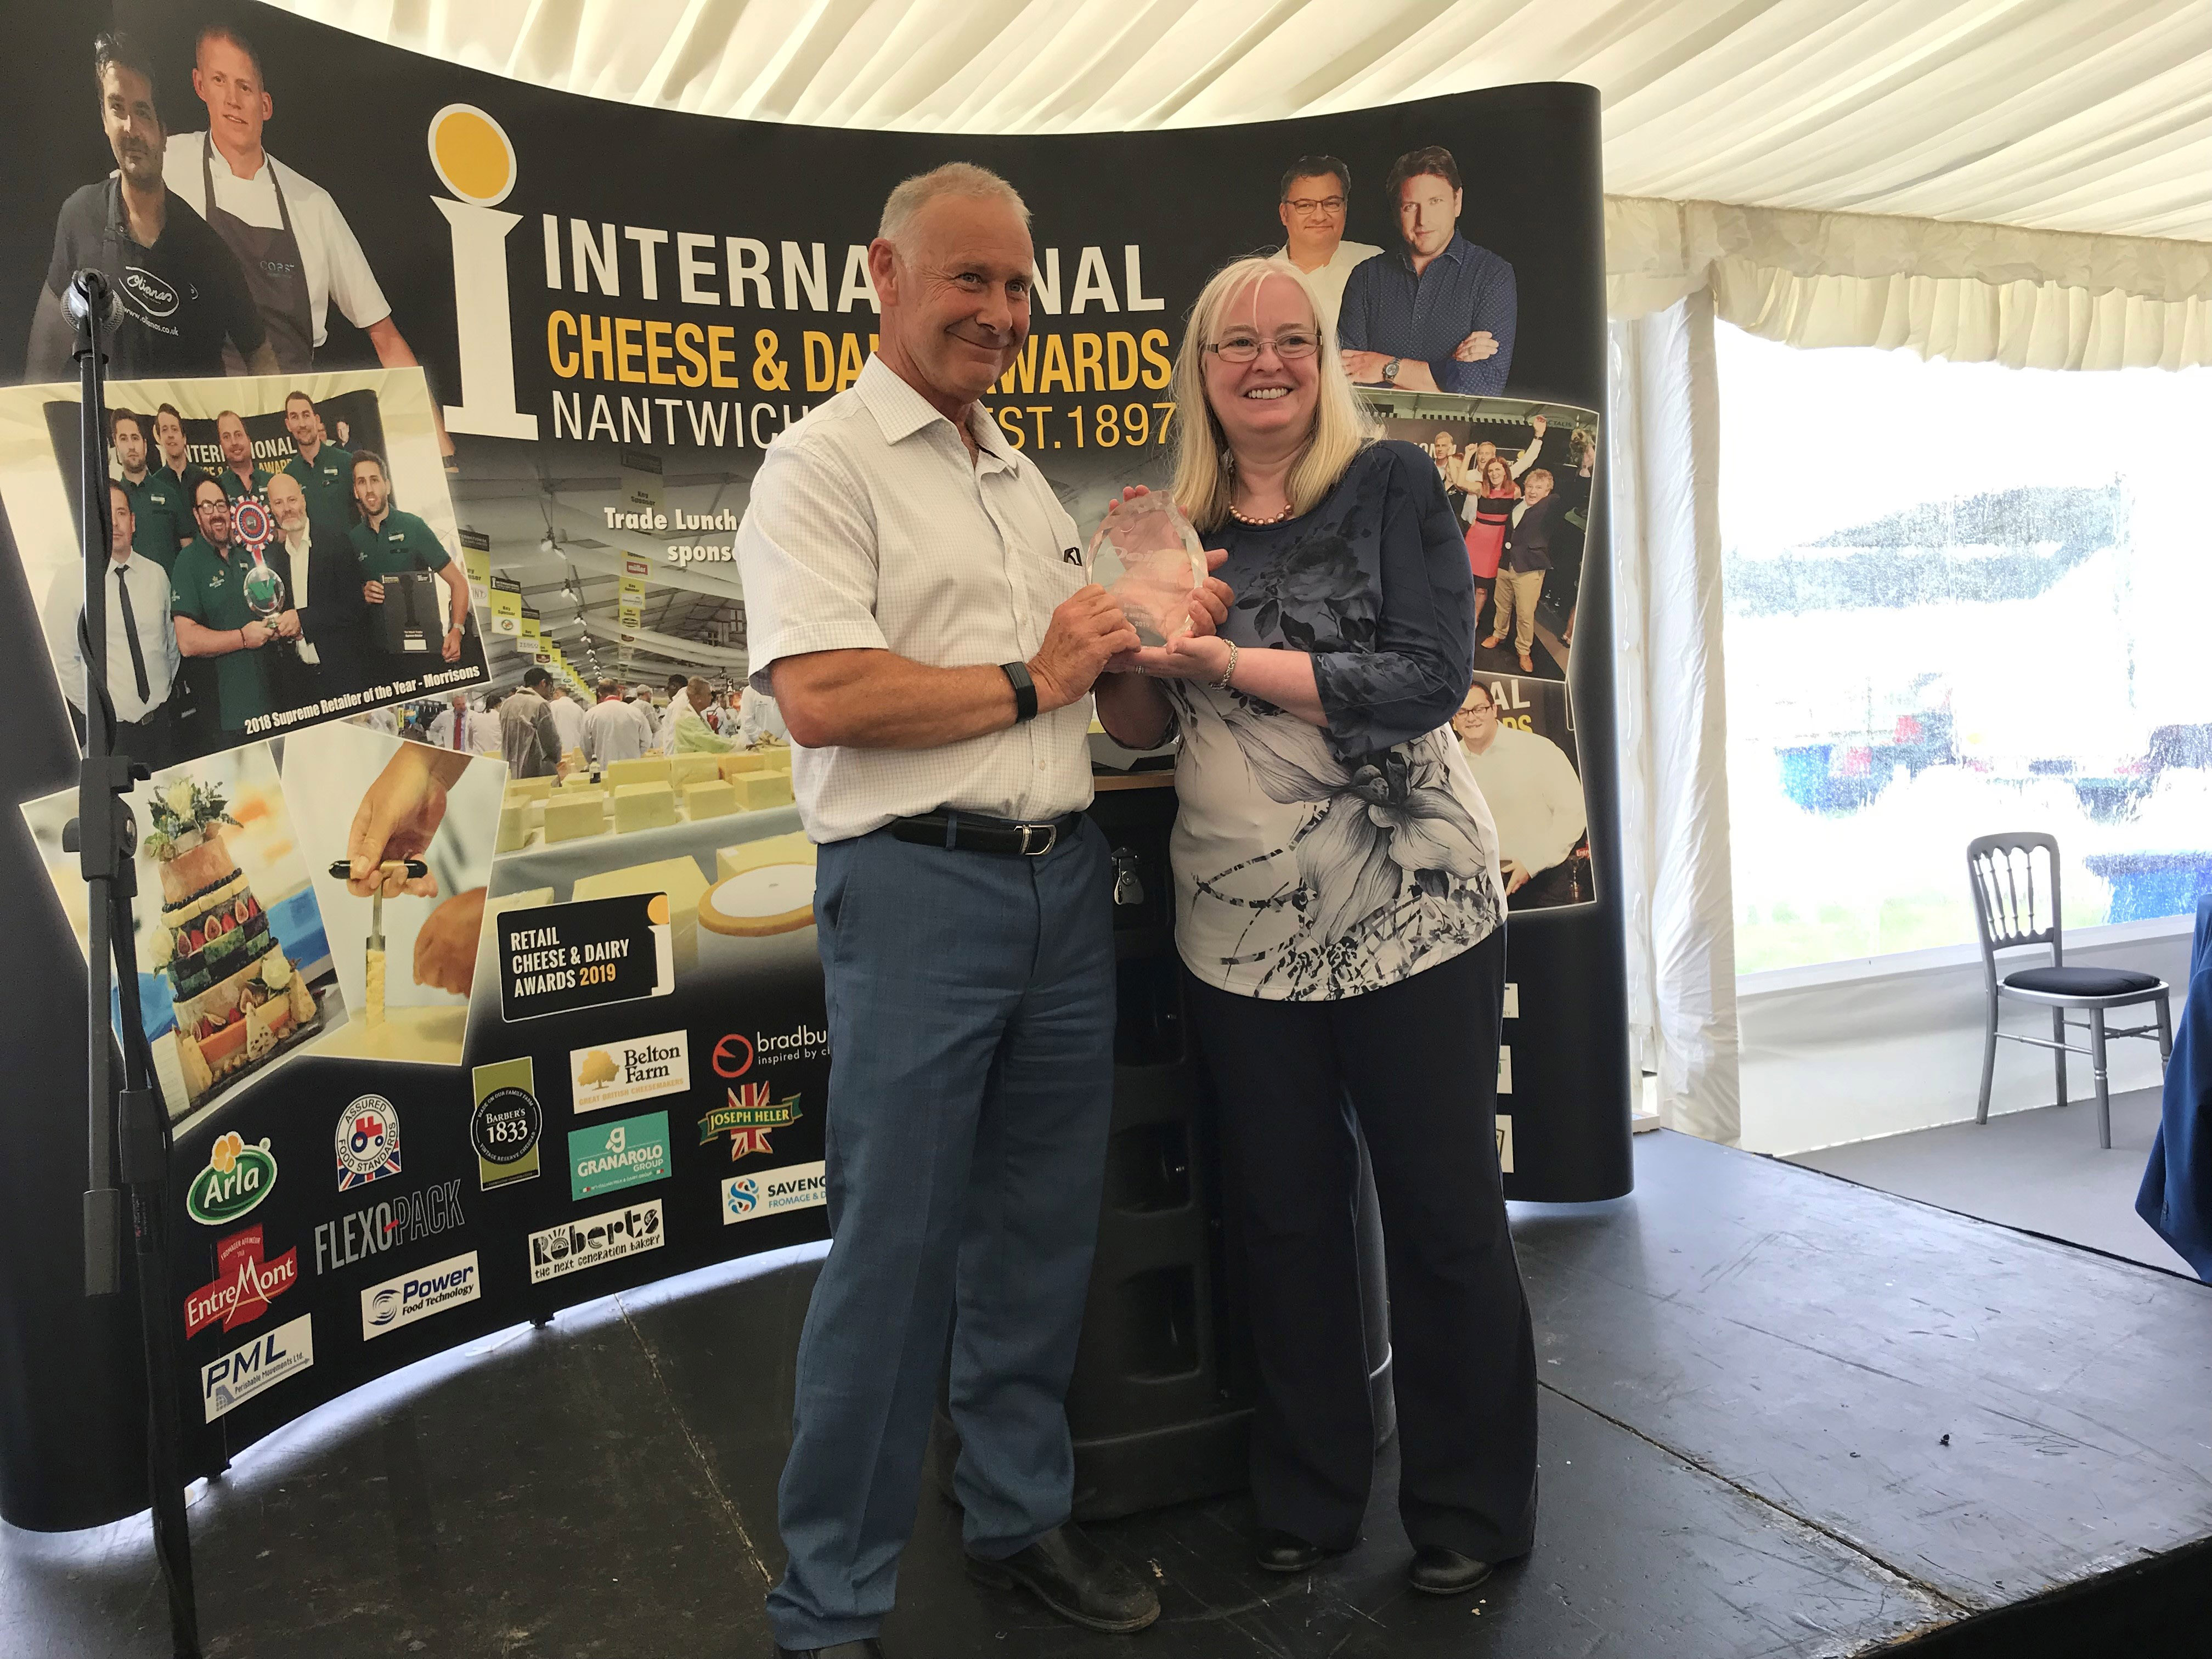 Alan Armstrong receives cheese award from Judith Bryans